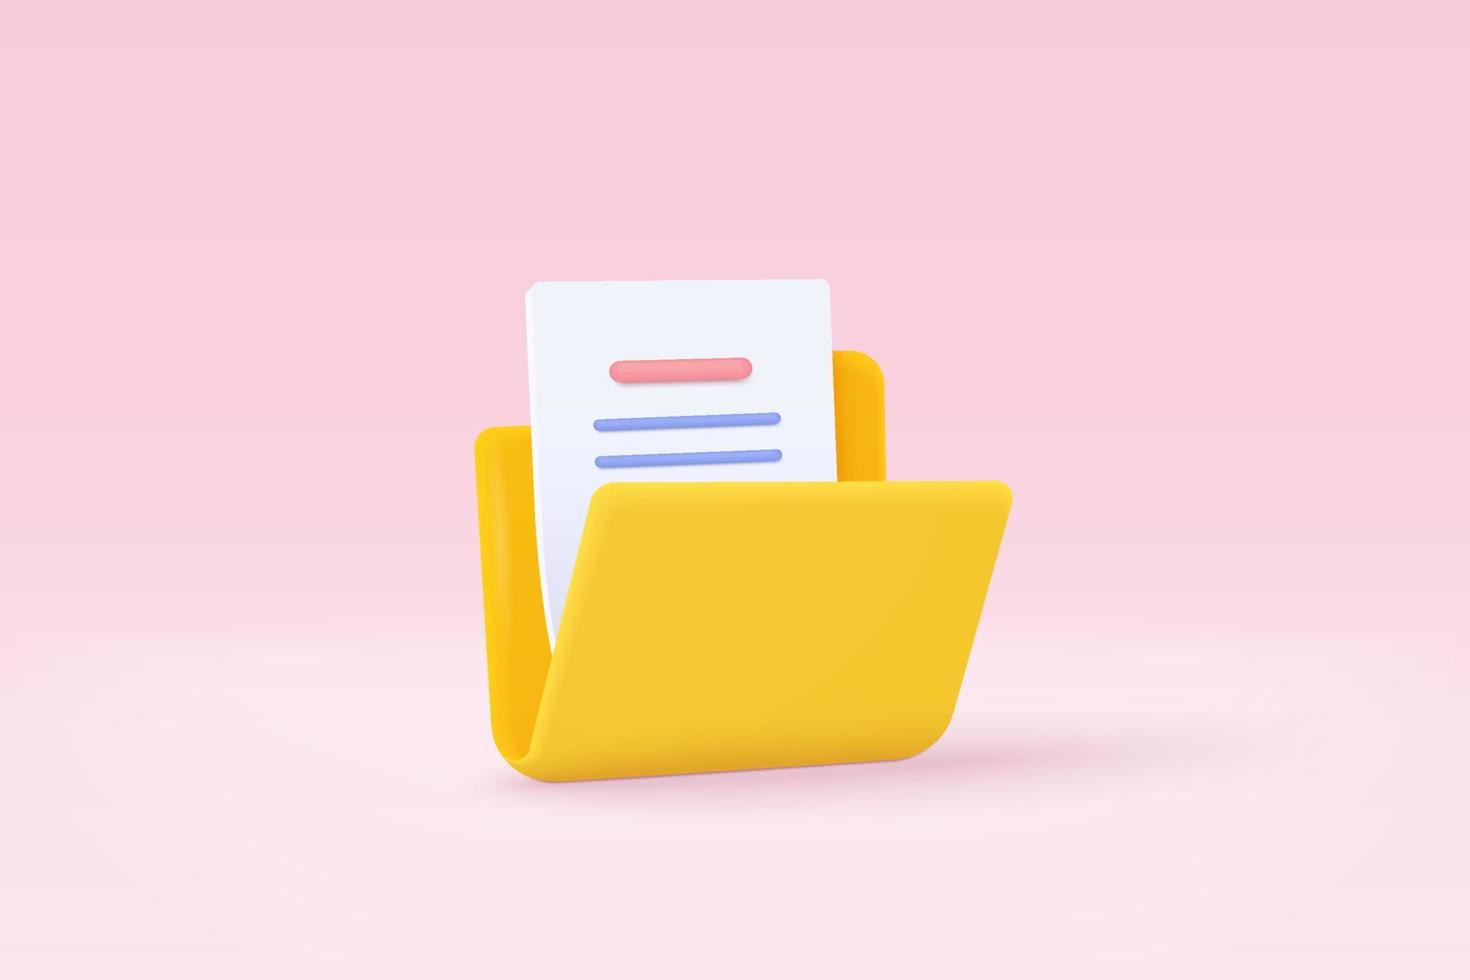 3d folder and paper for management file, document efficient work on project plan concept. Document cartoon style minimal folder with files icon. 3d vector render on isolated pink pastel background